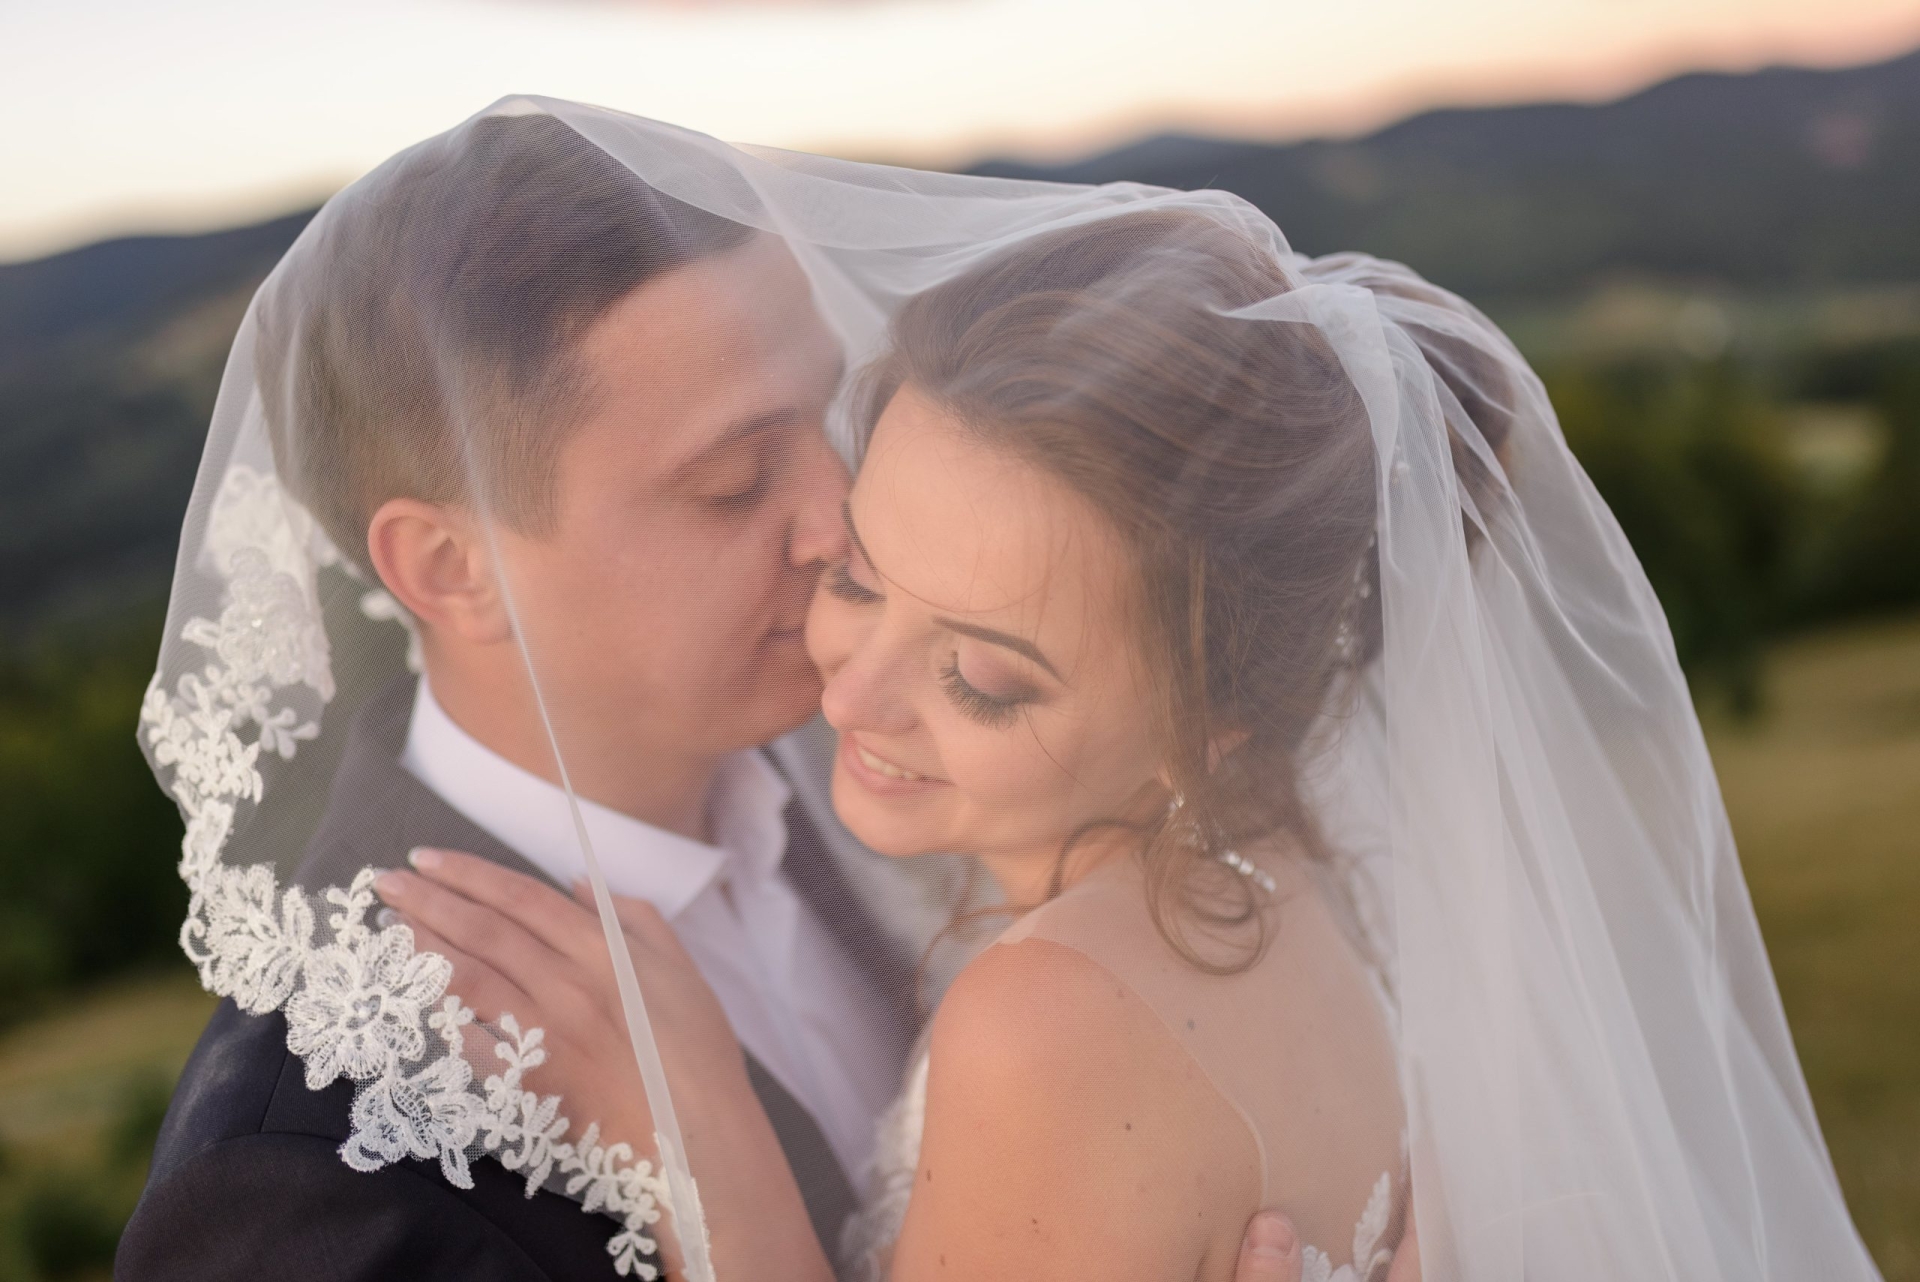 wedding photography in the mountains newlyweds ar 2021 09 02 00 26 37 utc min scaled